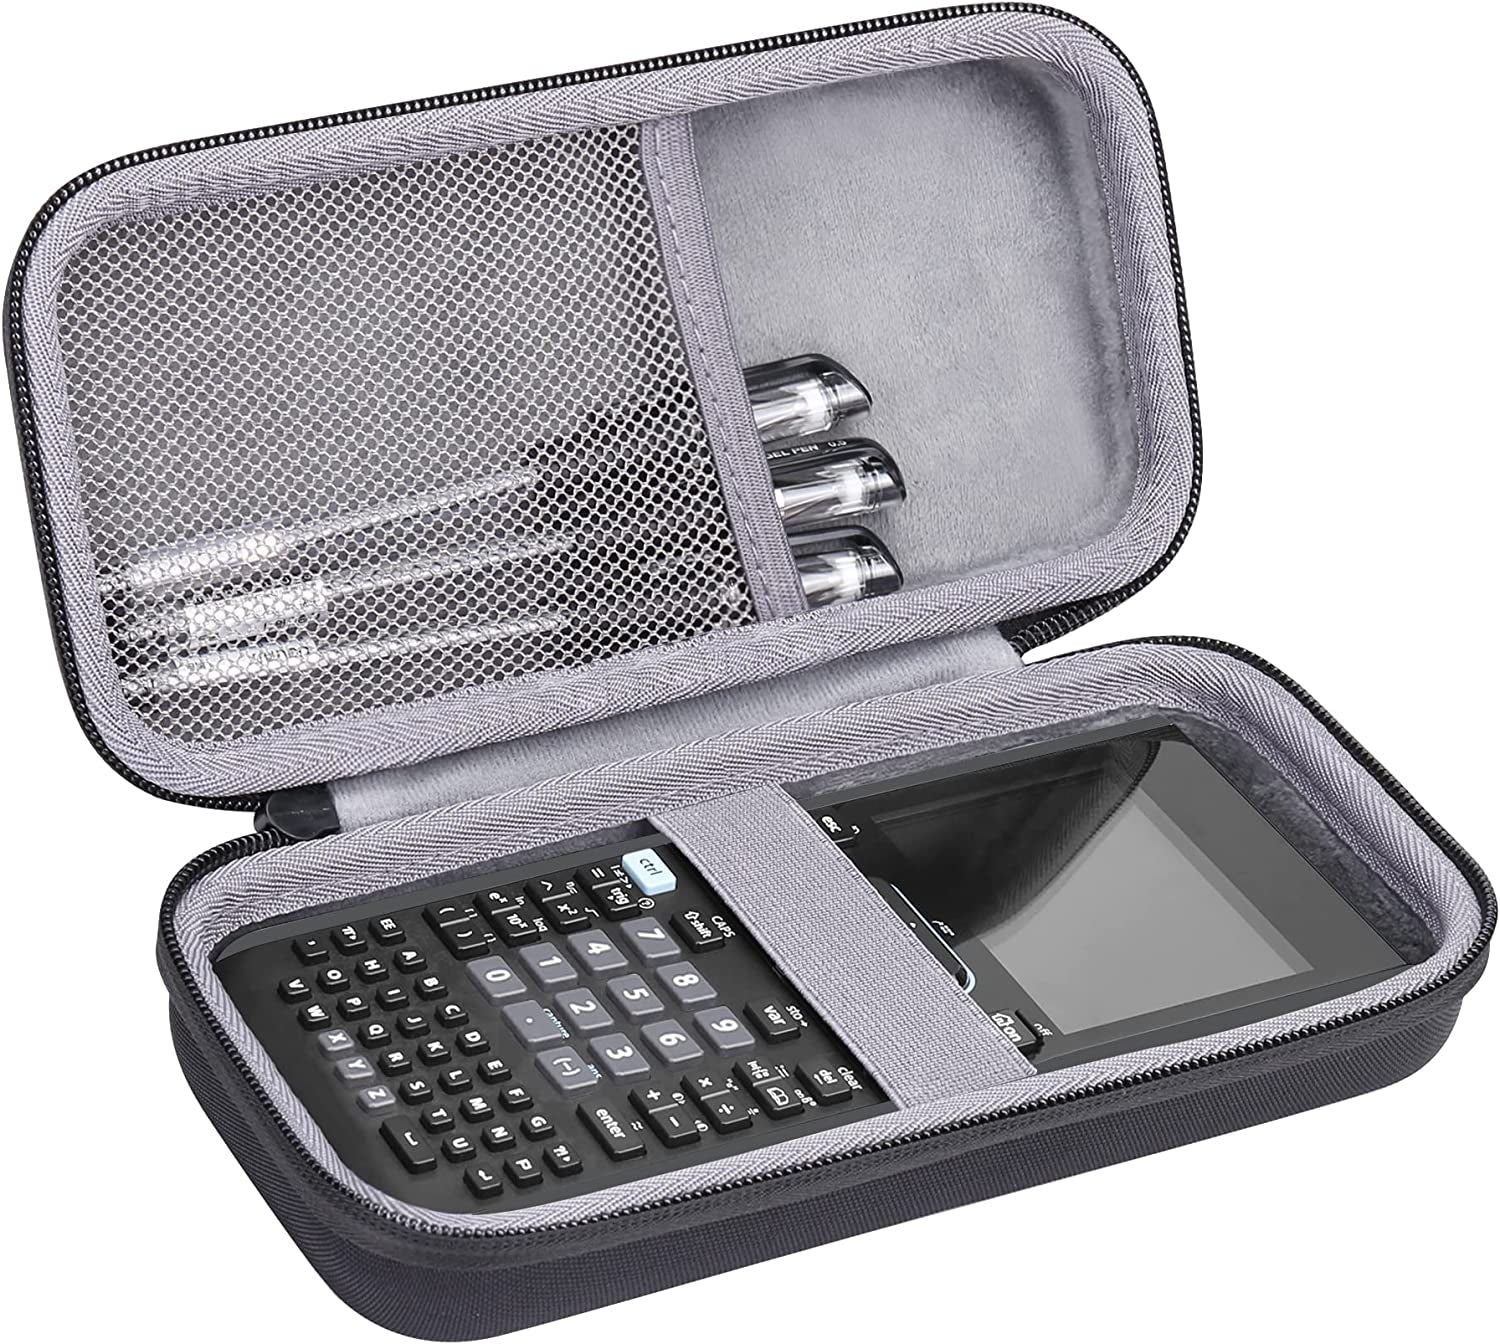 Hard Case Replacement for Texas Instruments TI-84 plus CE/TI-84 Plus/Ti-84 / TI-83 Plus/Ti-83 / TI-89 Titanium/Ti-85 / TI-86 / Nspire CX Cas/Ti-Nspire CX II CAS Color Graphing Calculator